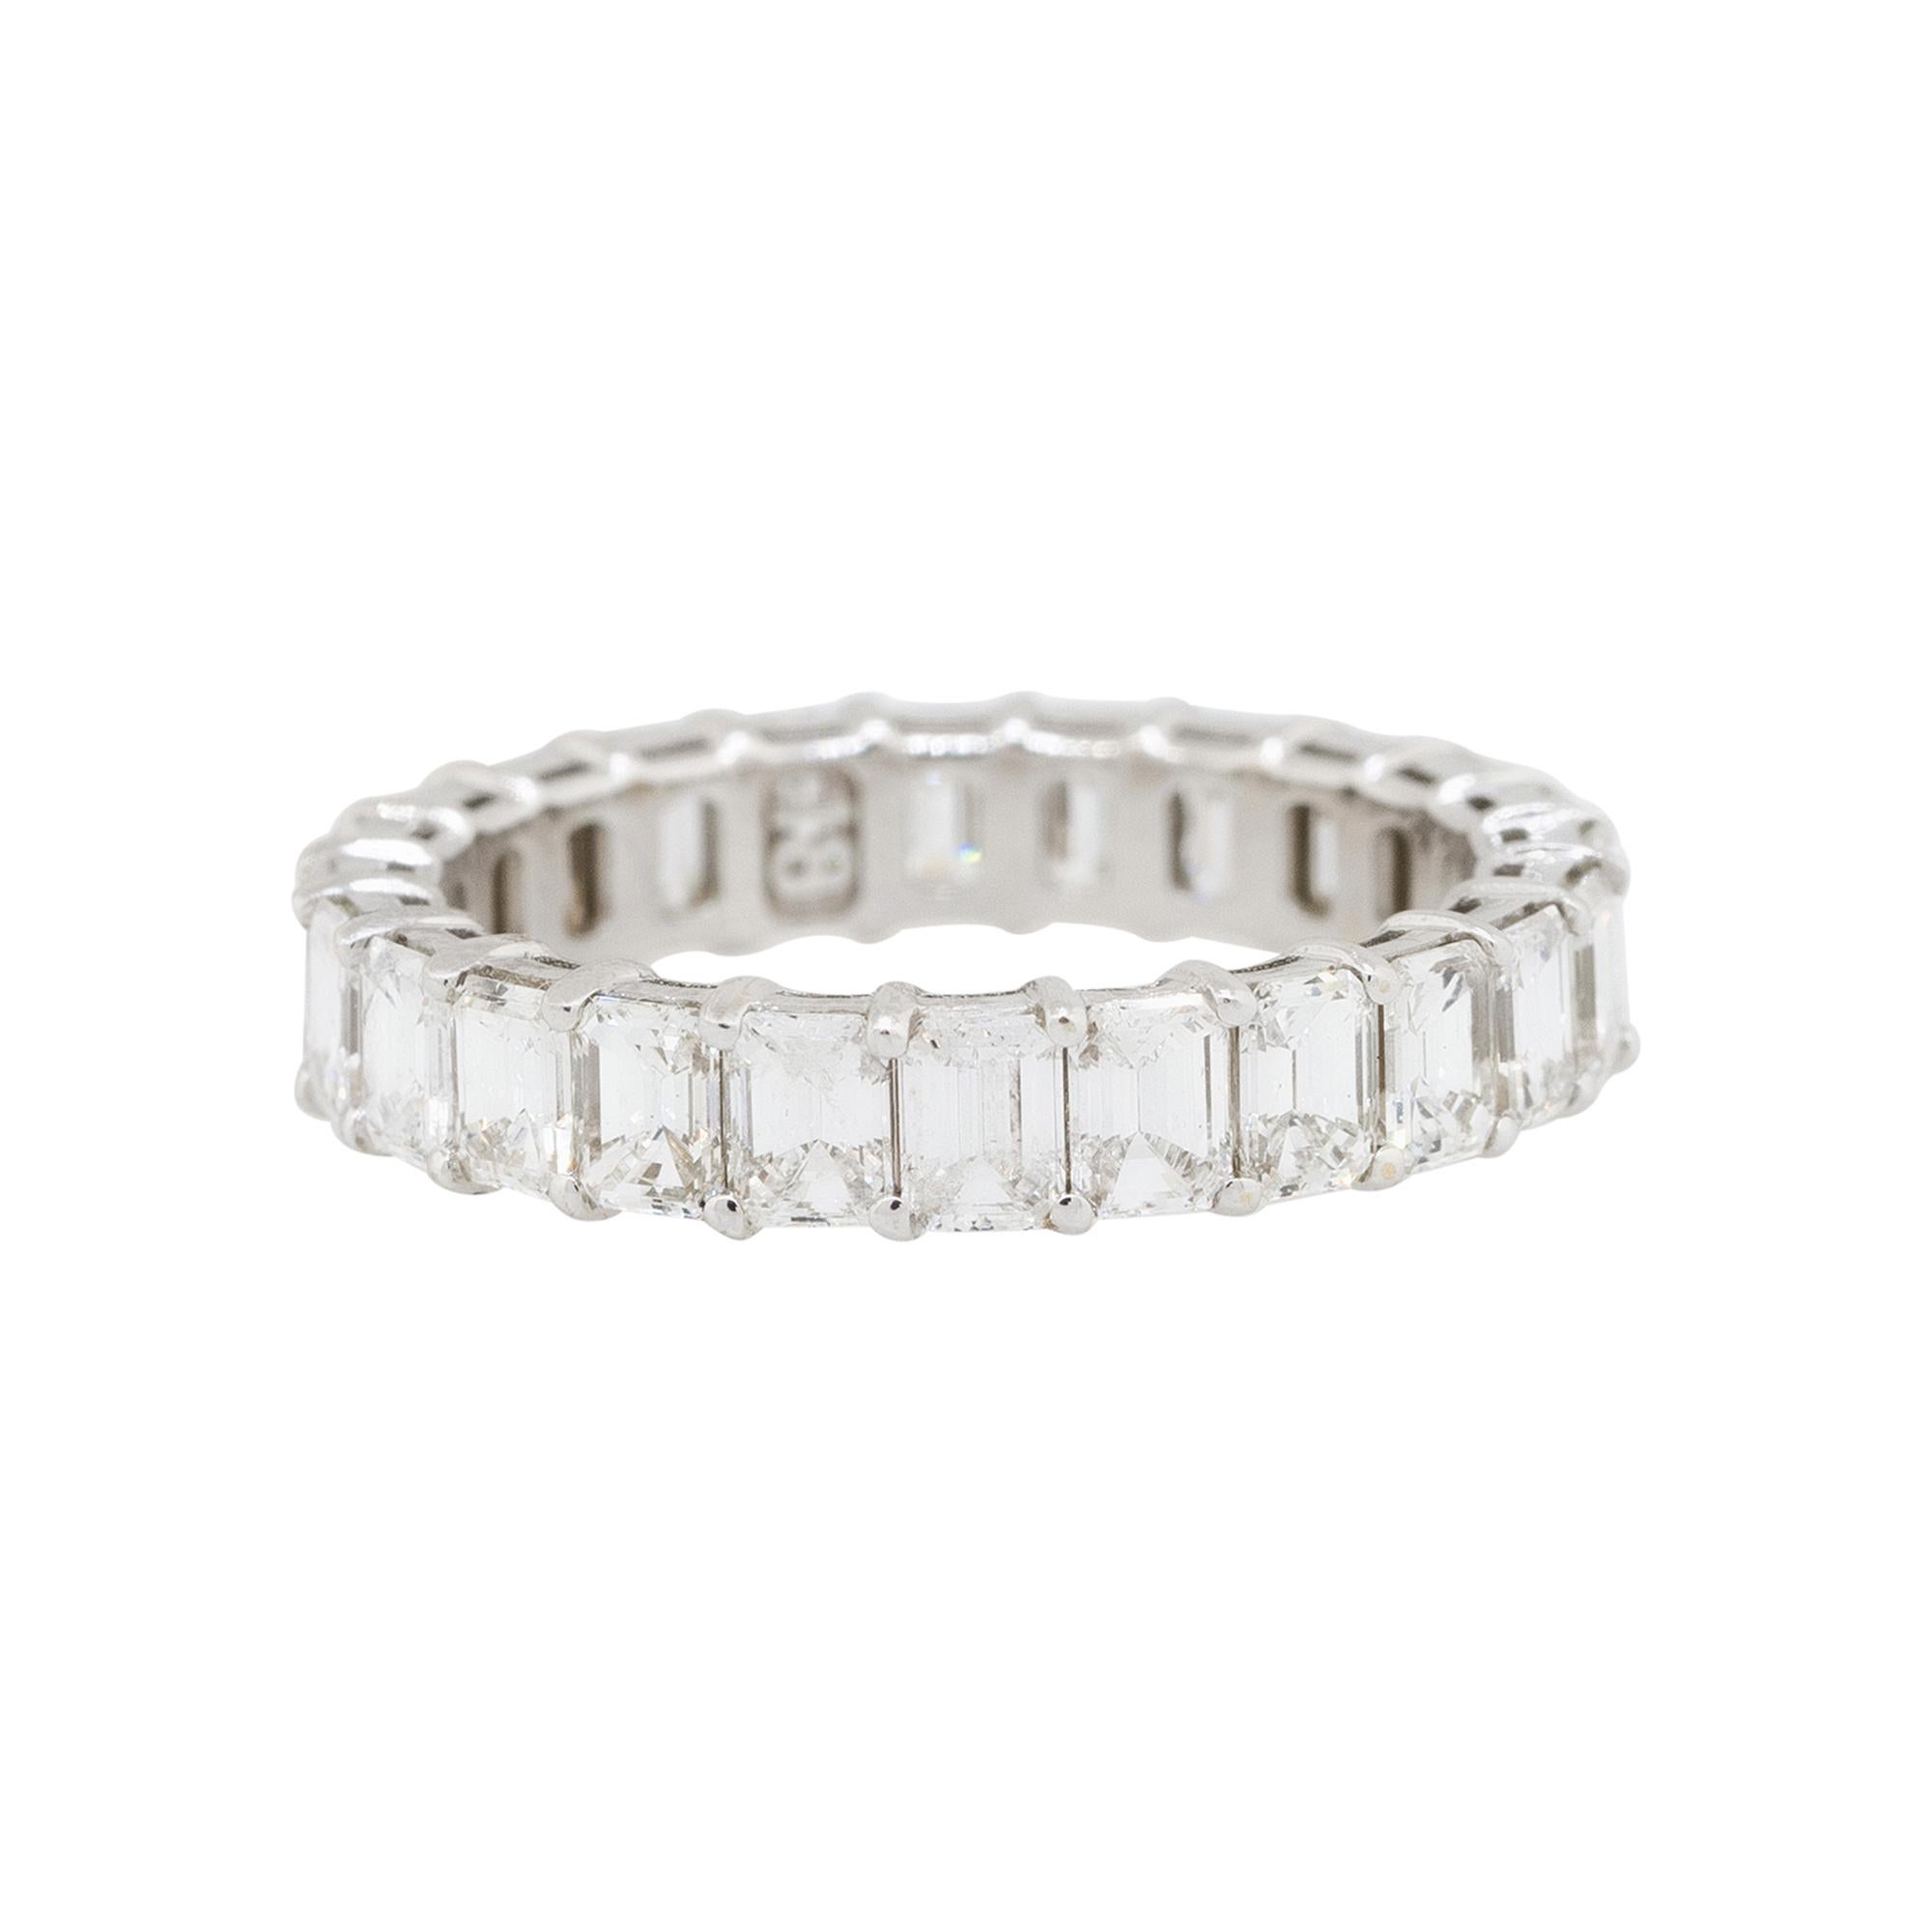 Material: 14k white gold
Diamond Details: Approx. 3.54ctw of emerald cut Diamonds. Diamonds are G/H in color and VS in clarity
Size: 6.25 
Measurements: 21.70mm x 4mm x 21.70mm
Weight: 3g (1.9dwt)
Additional Details: This item comes with a